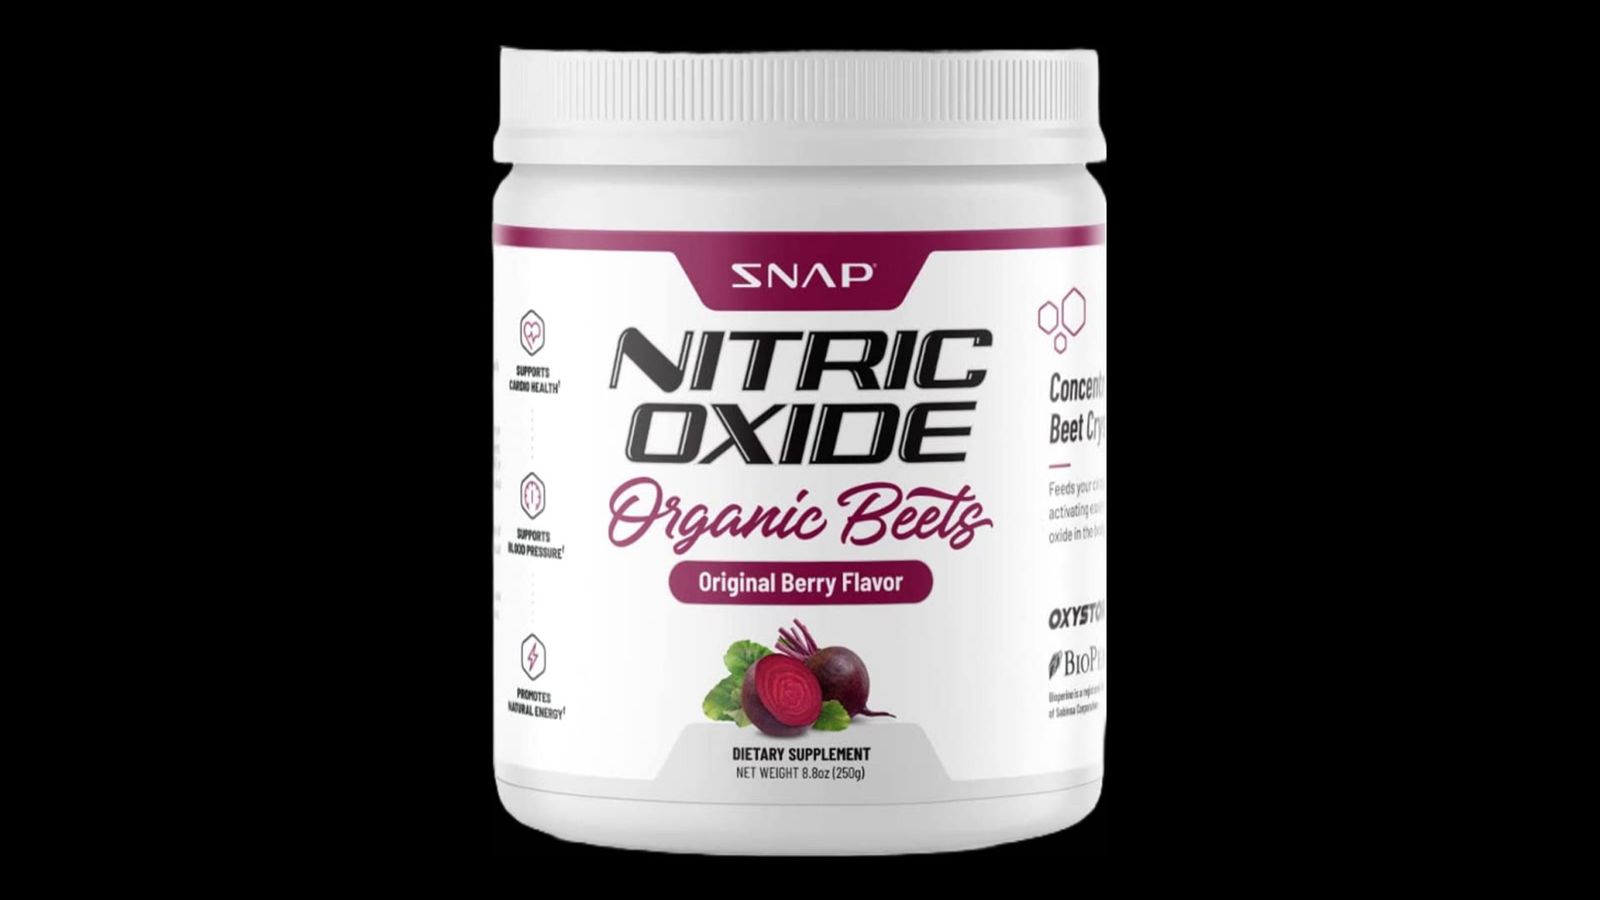 Snap Supplements Nitric Oxide Booster product image of a white container with purple and black branding with a graphic of a cut open beet on the label.